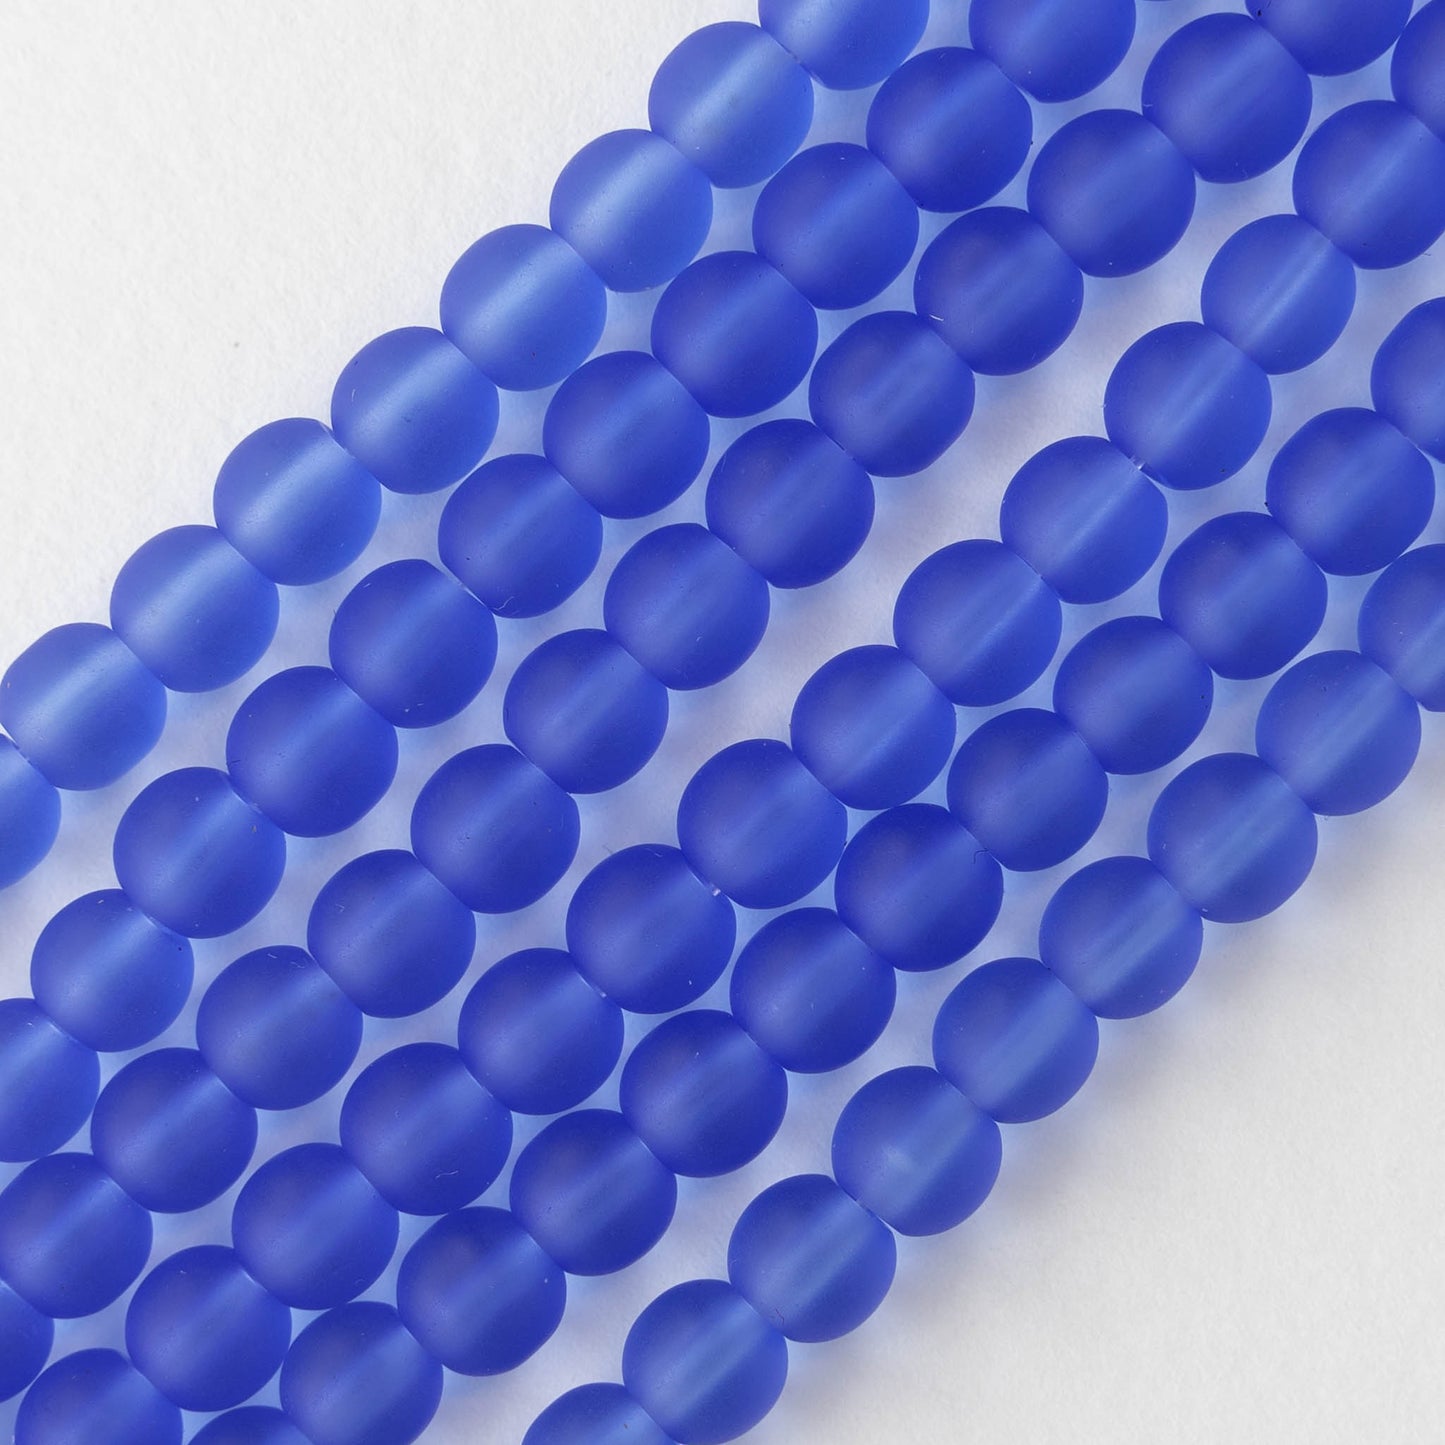 6mm Frosted Glass Rounds - Lt Sapphire Blue - 16 Inches